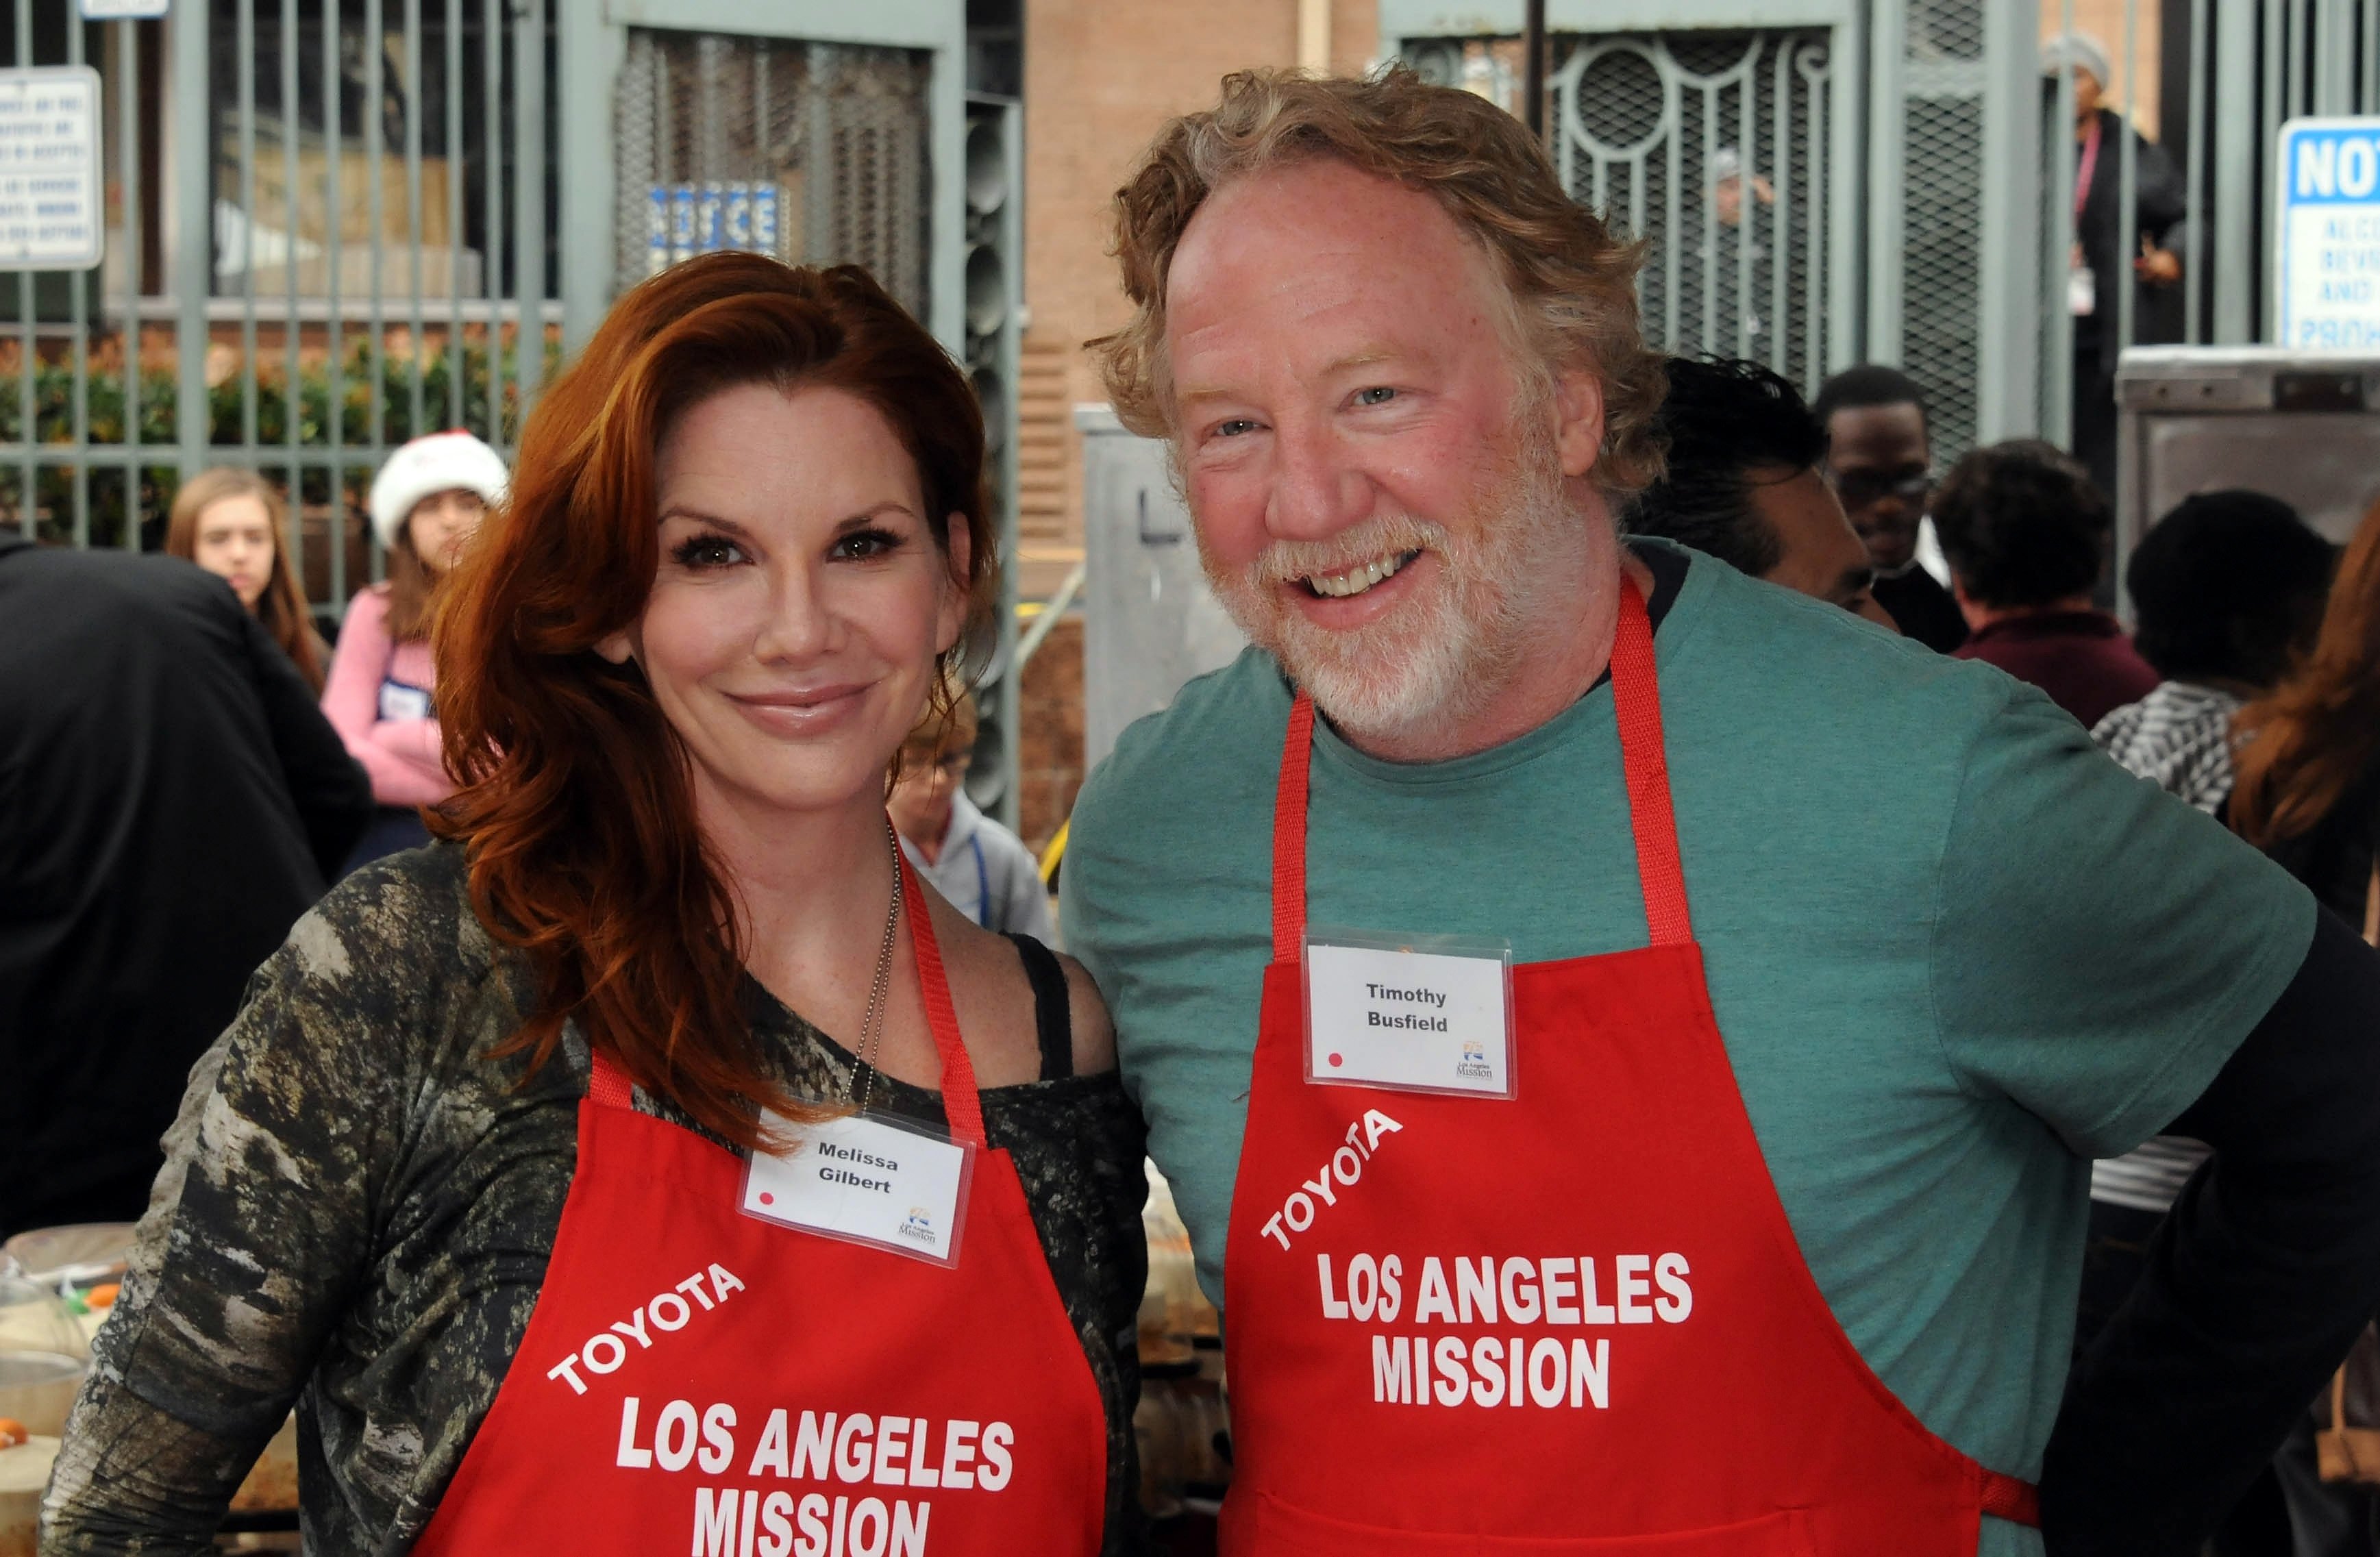 Melissa Gilbert and Timothy Busfield in red aprons.